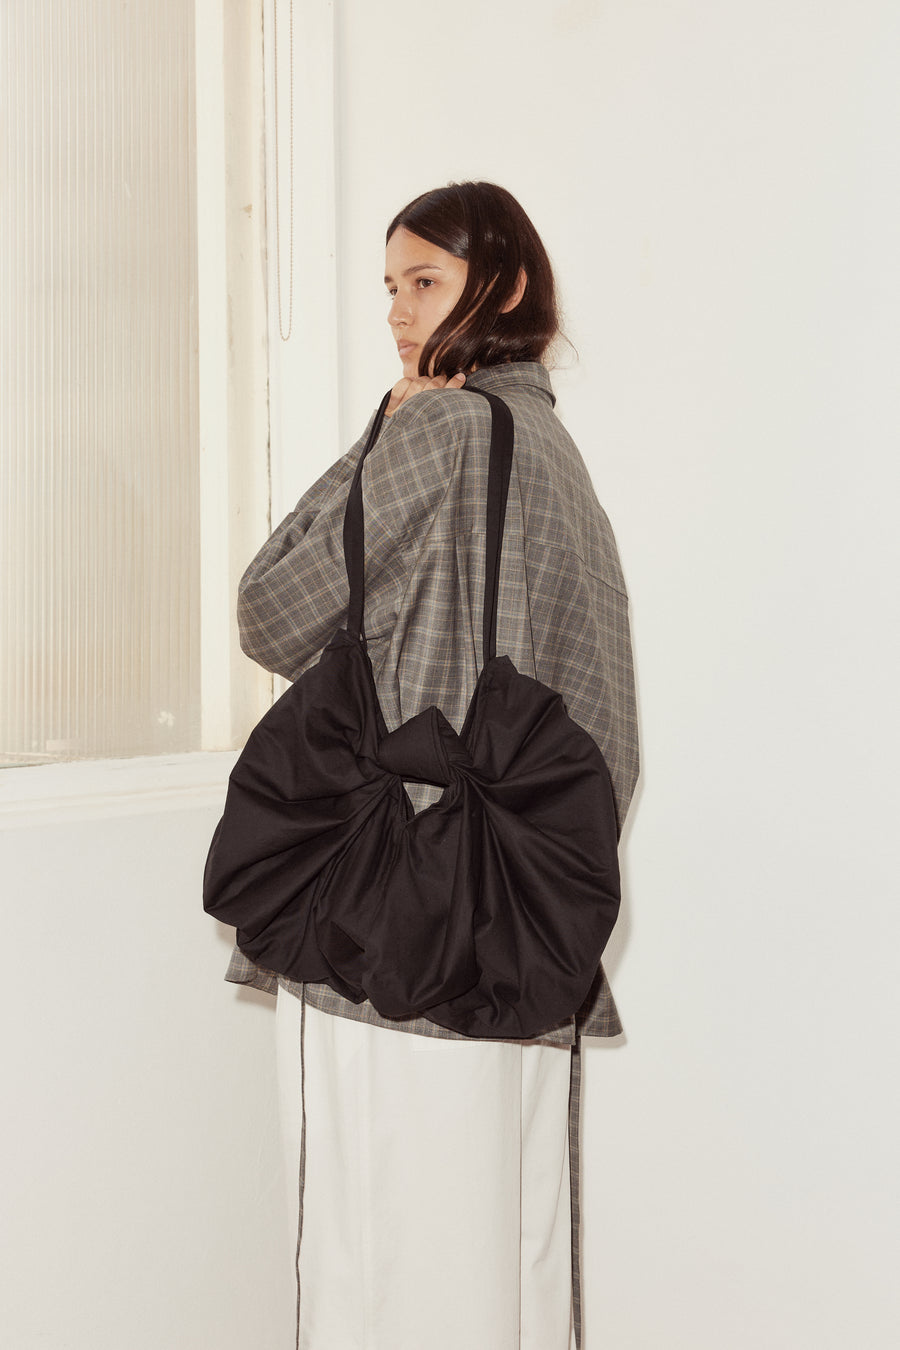 female model pictured with the Deiji Studios Bow Bag, a black organic cotton bag with subtle lustre in the shape of a ribbon bow, with long shoulder straps